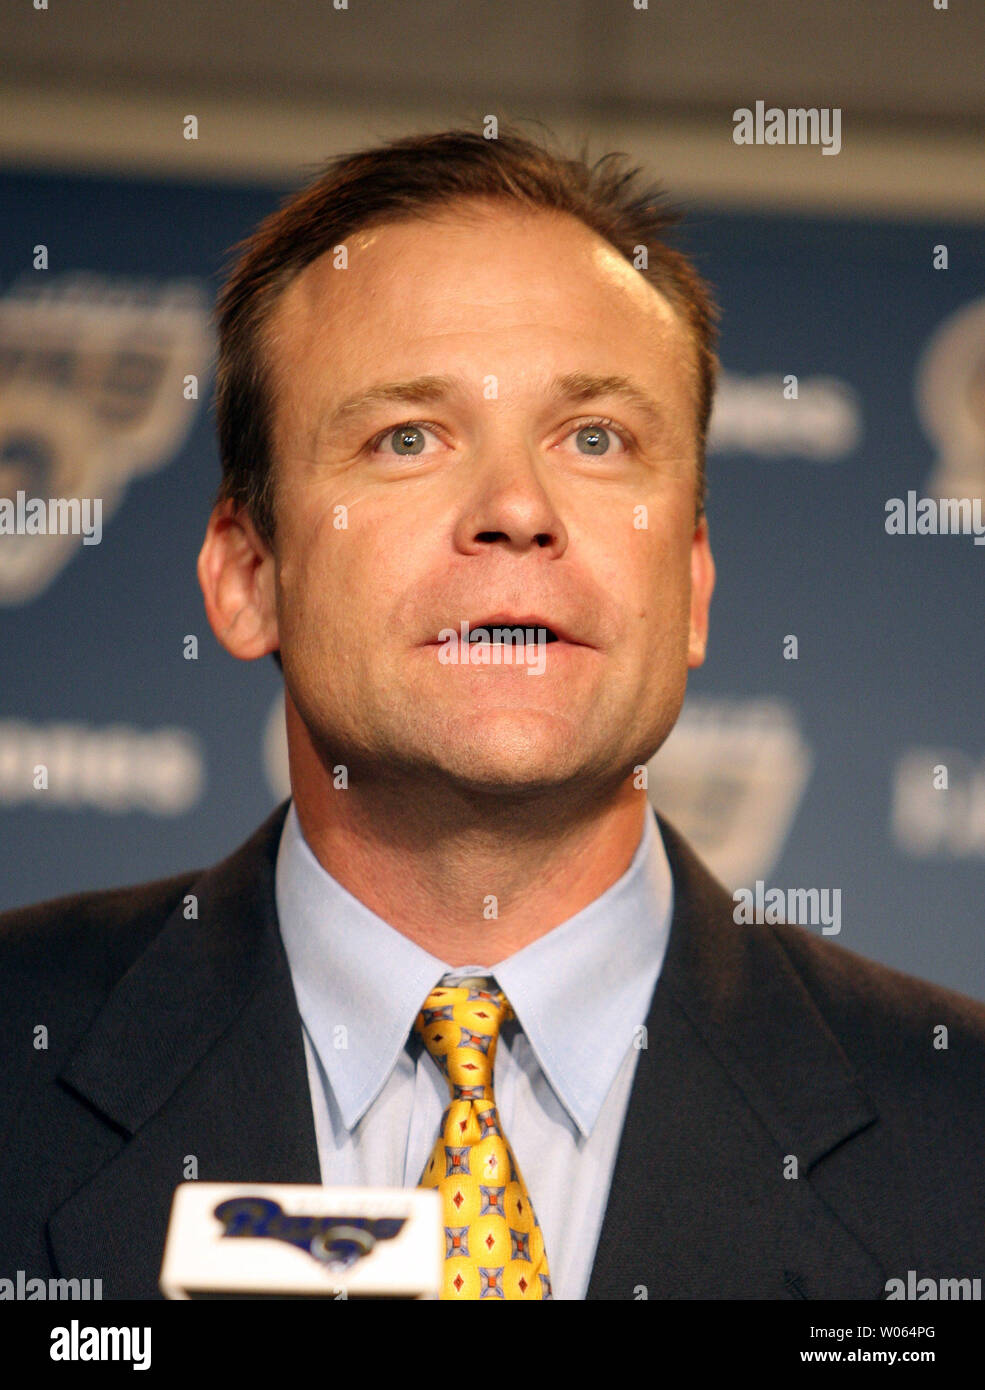 New St. Louis Rams head football coach Scott Linehan talks to reporters after being introduced as the 22nd coach in team history at the Rams practice facility in Earth City, Mo on January 20, 2006. Linehan comes to the Rams after one season as the offfensive coordinator for the Miami Dolphins. Linehan, 42, replaces Mike Martz who was head coach for five years and fired after the 2005-06 season.  (UPI Photo/Bill Greenblatt) Stock Photo